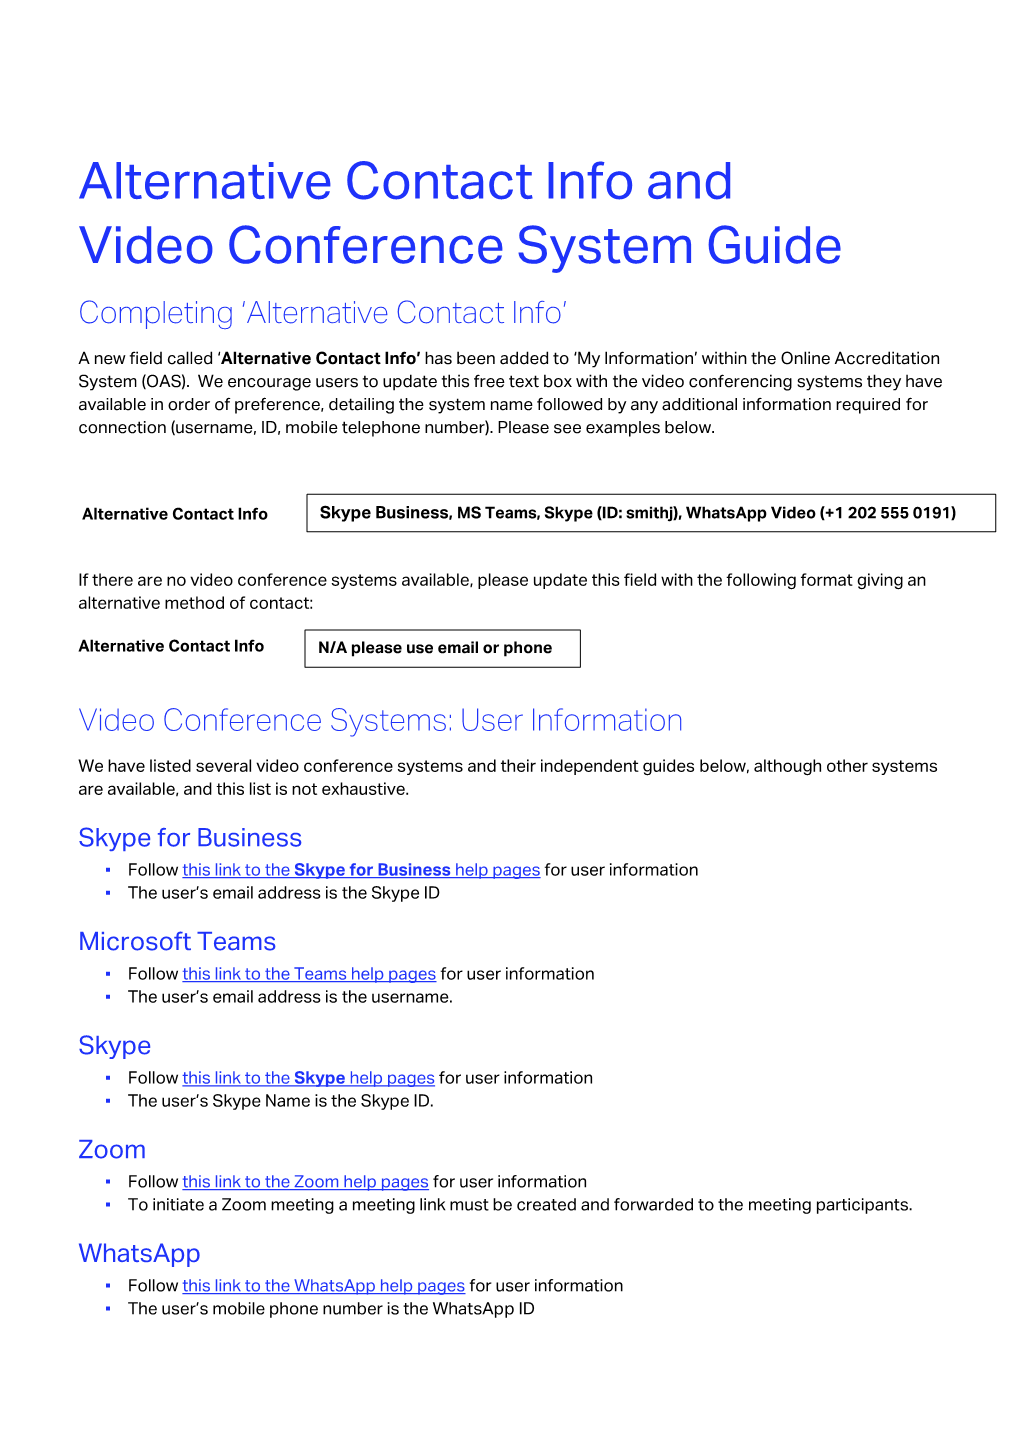 Alternative Contact Info and Video Conference System Guide Completing ‘Alternative Contact Info’